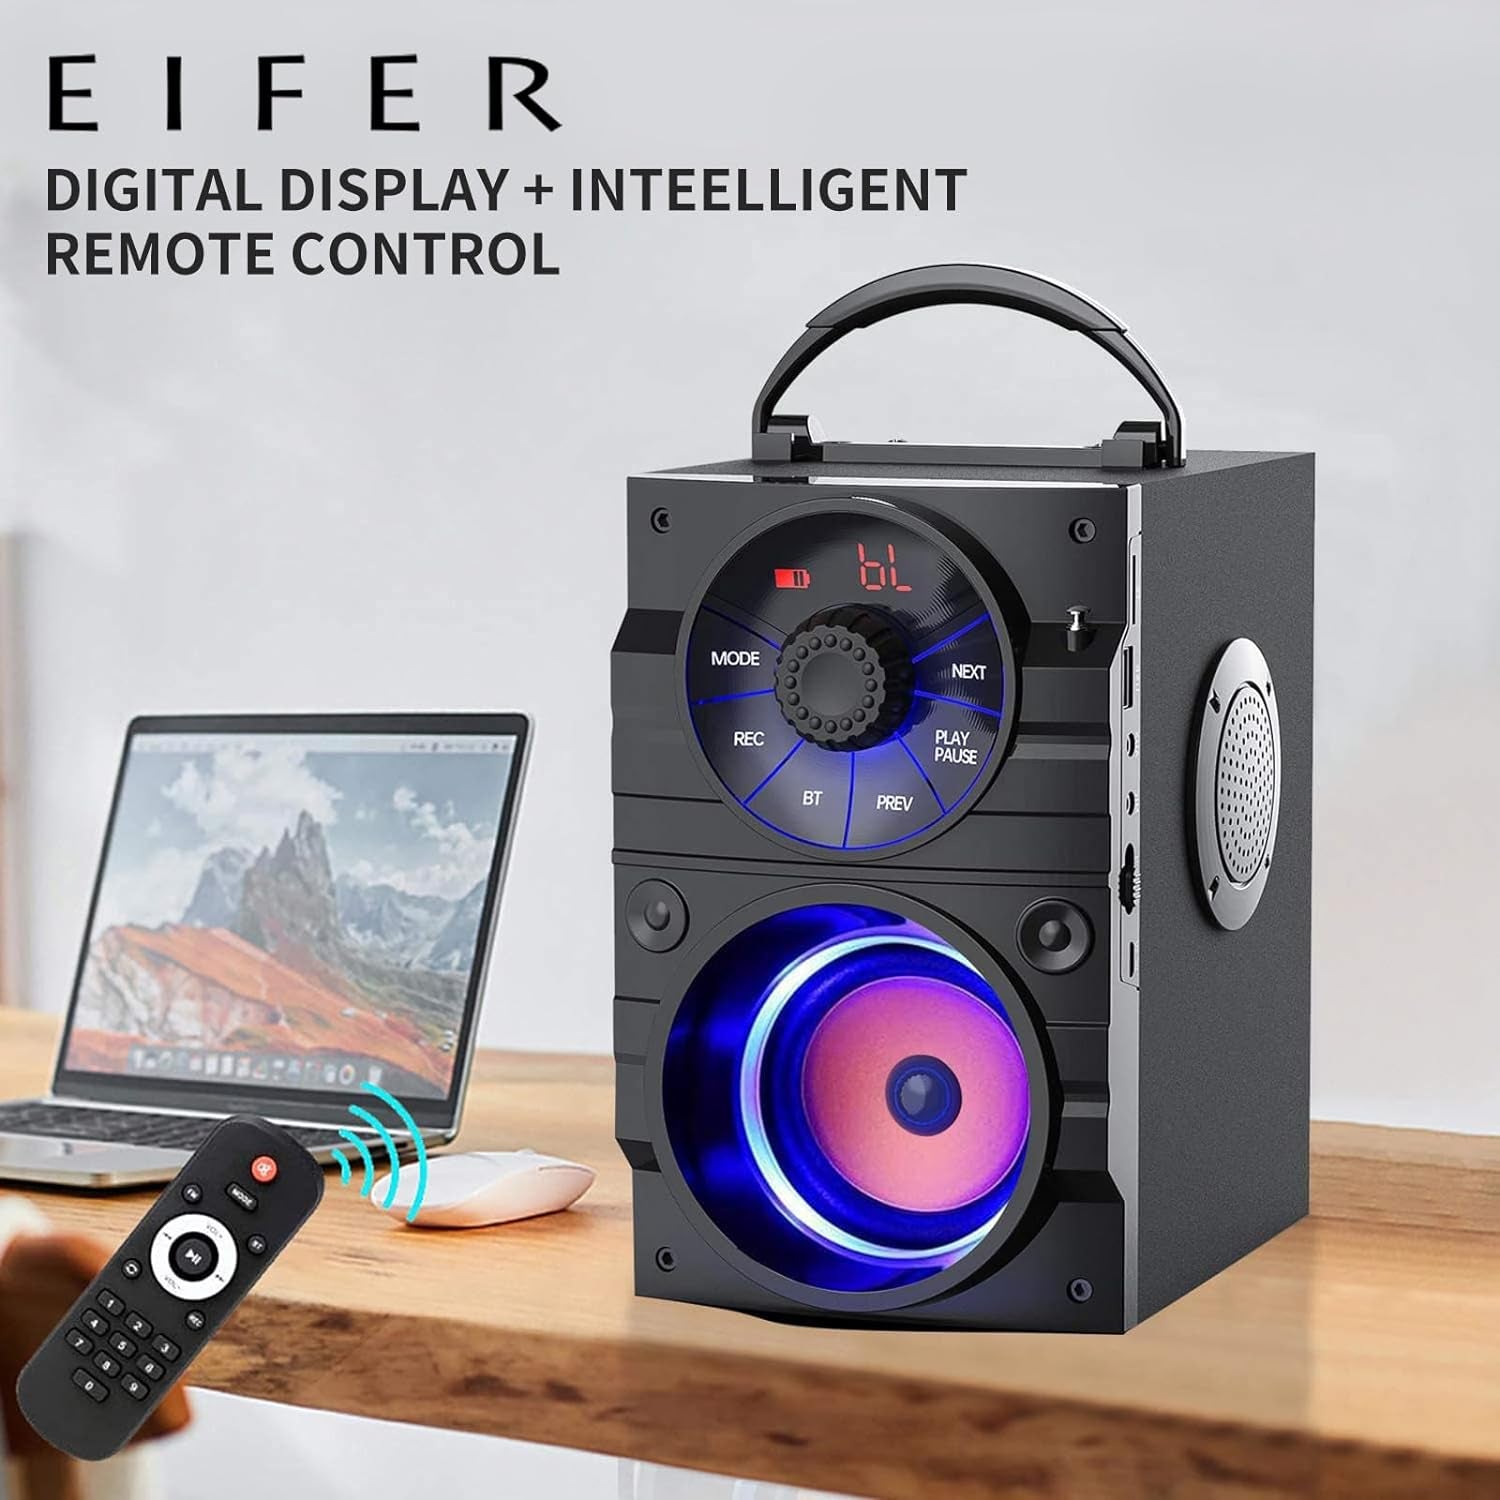 Portable Bluetooth Party Speaker with Subwoofer, Heavy Bass, Wireless, FM Radio, Remote Control, LCD Display - for Outdoor/Indoor, Home, Phone, PC